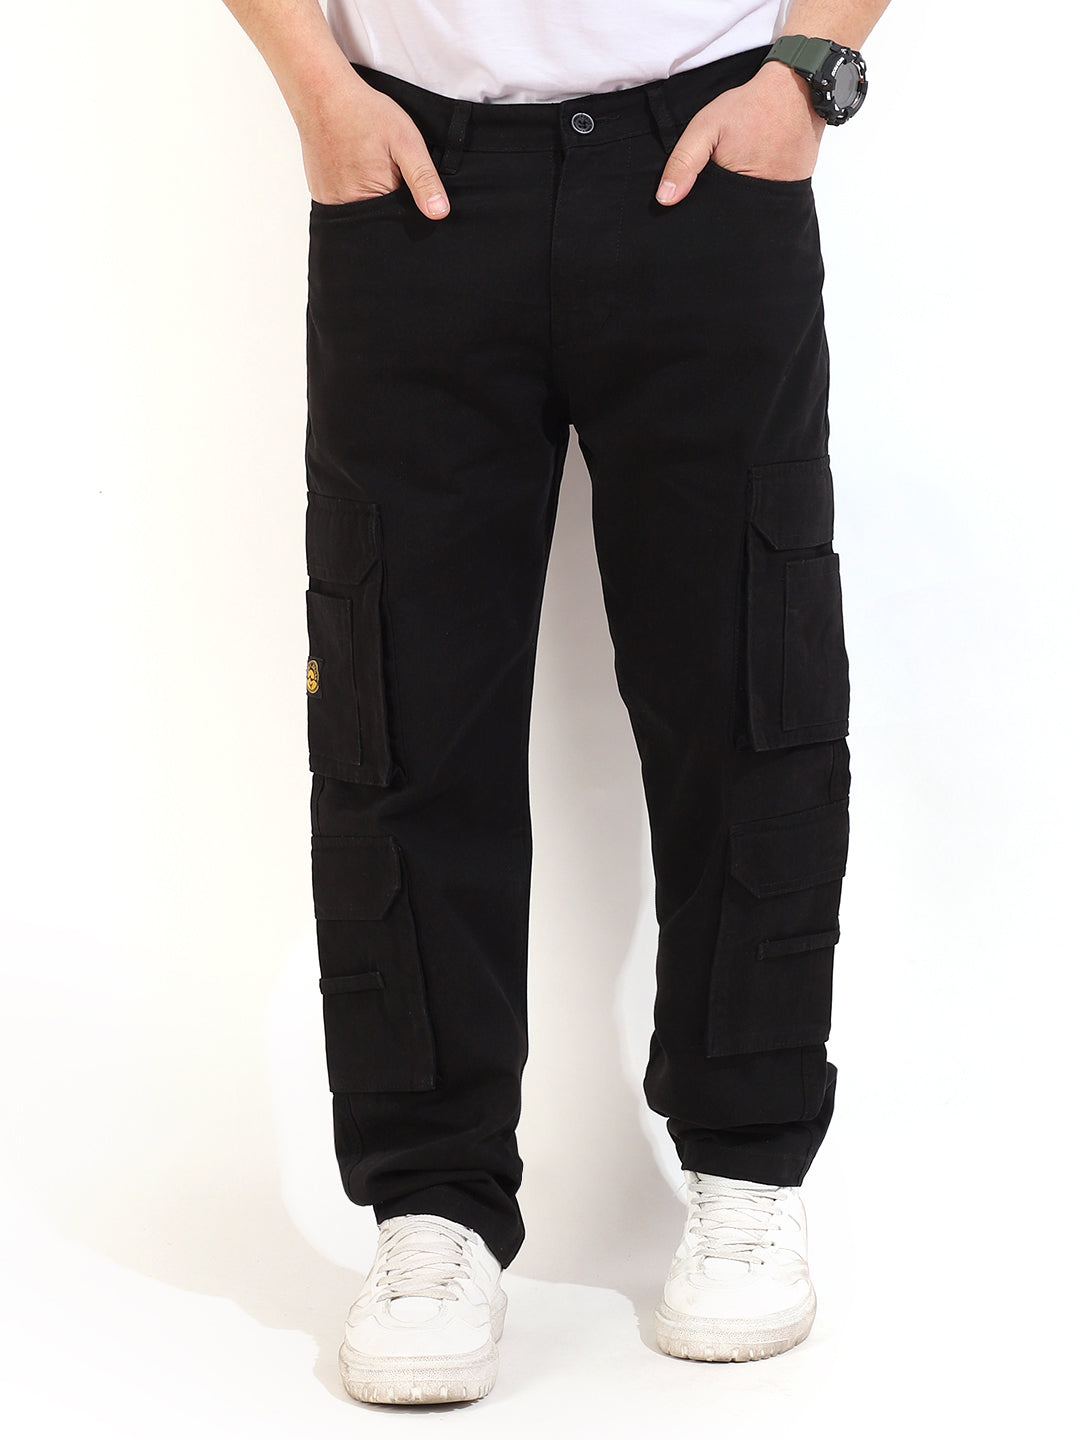 Black Cotton Drill 8 pocket Baggy Fit Cargo